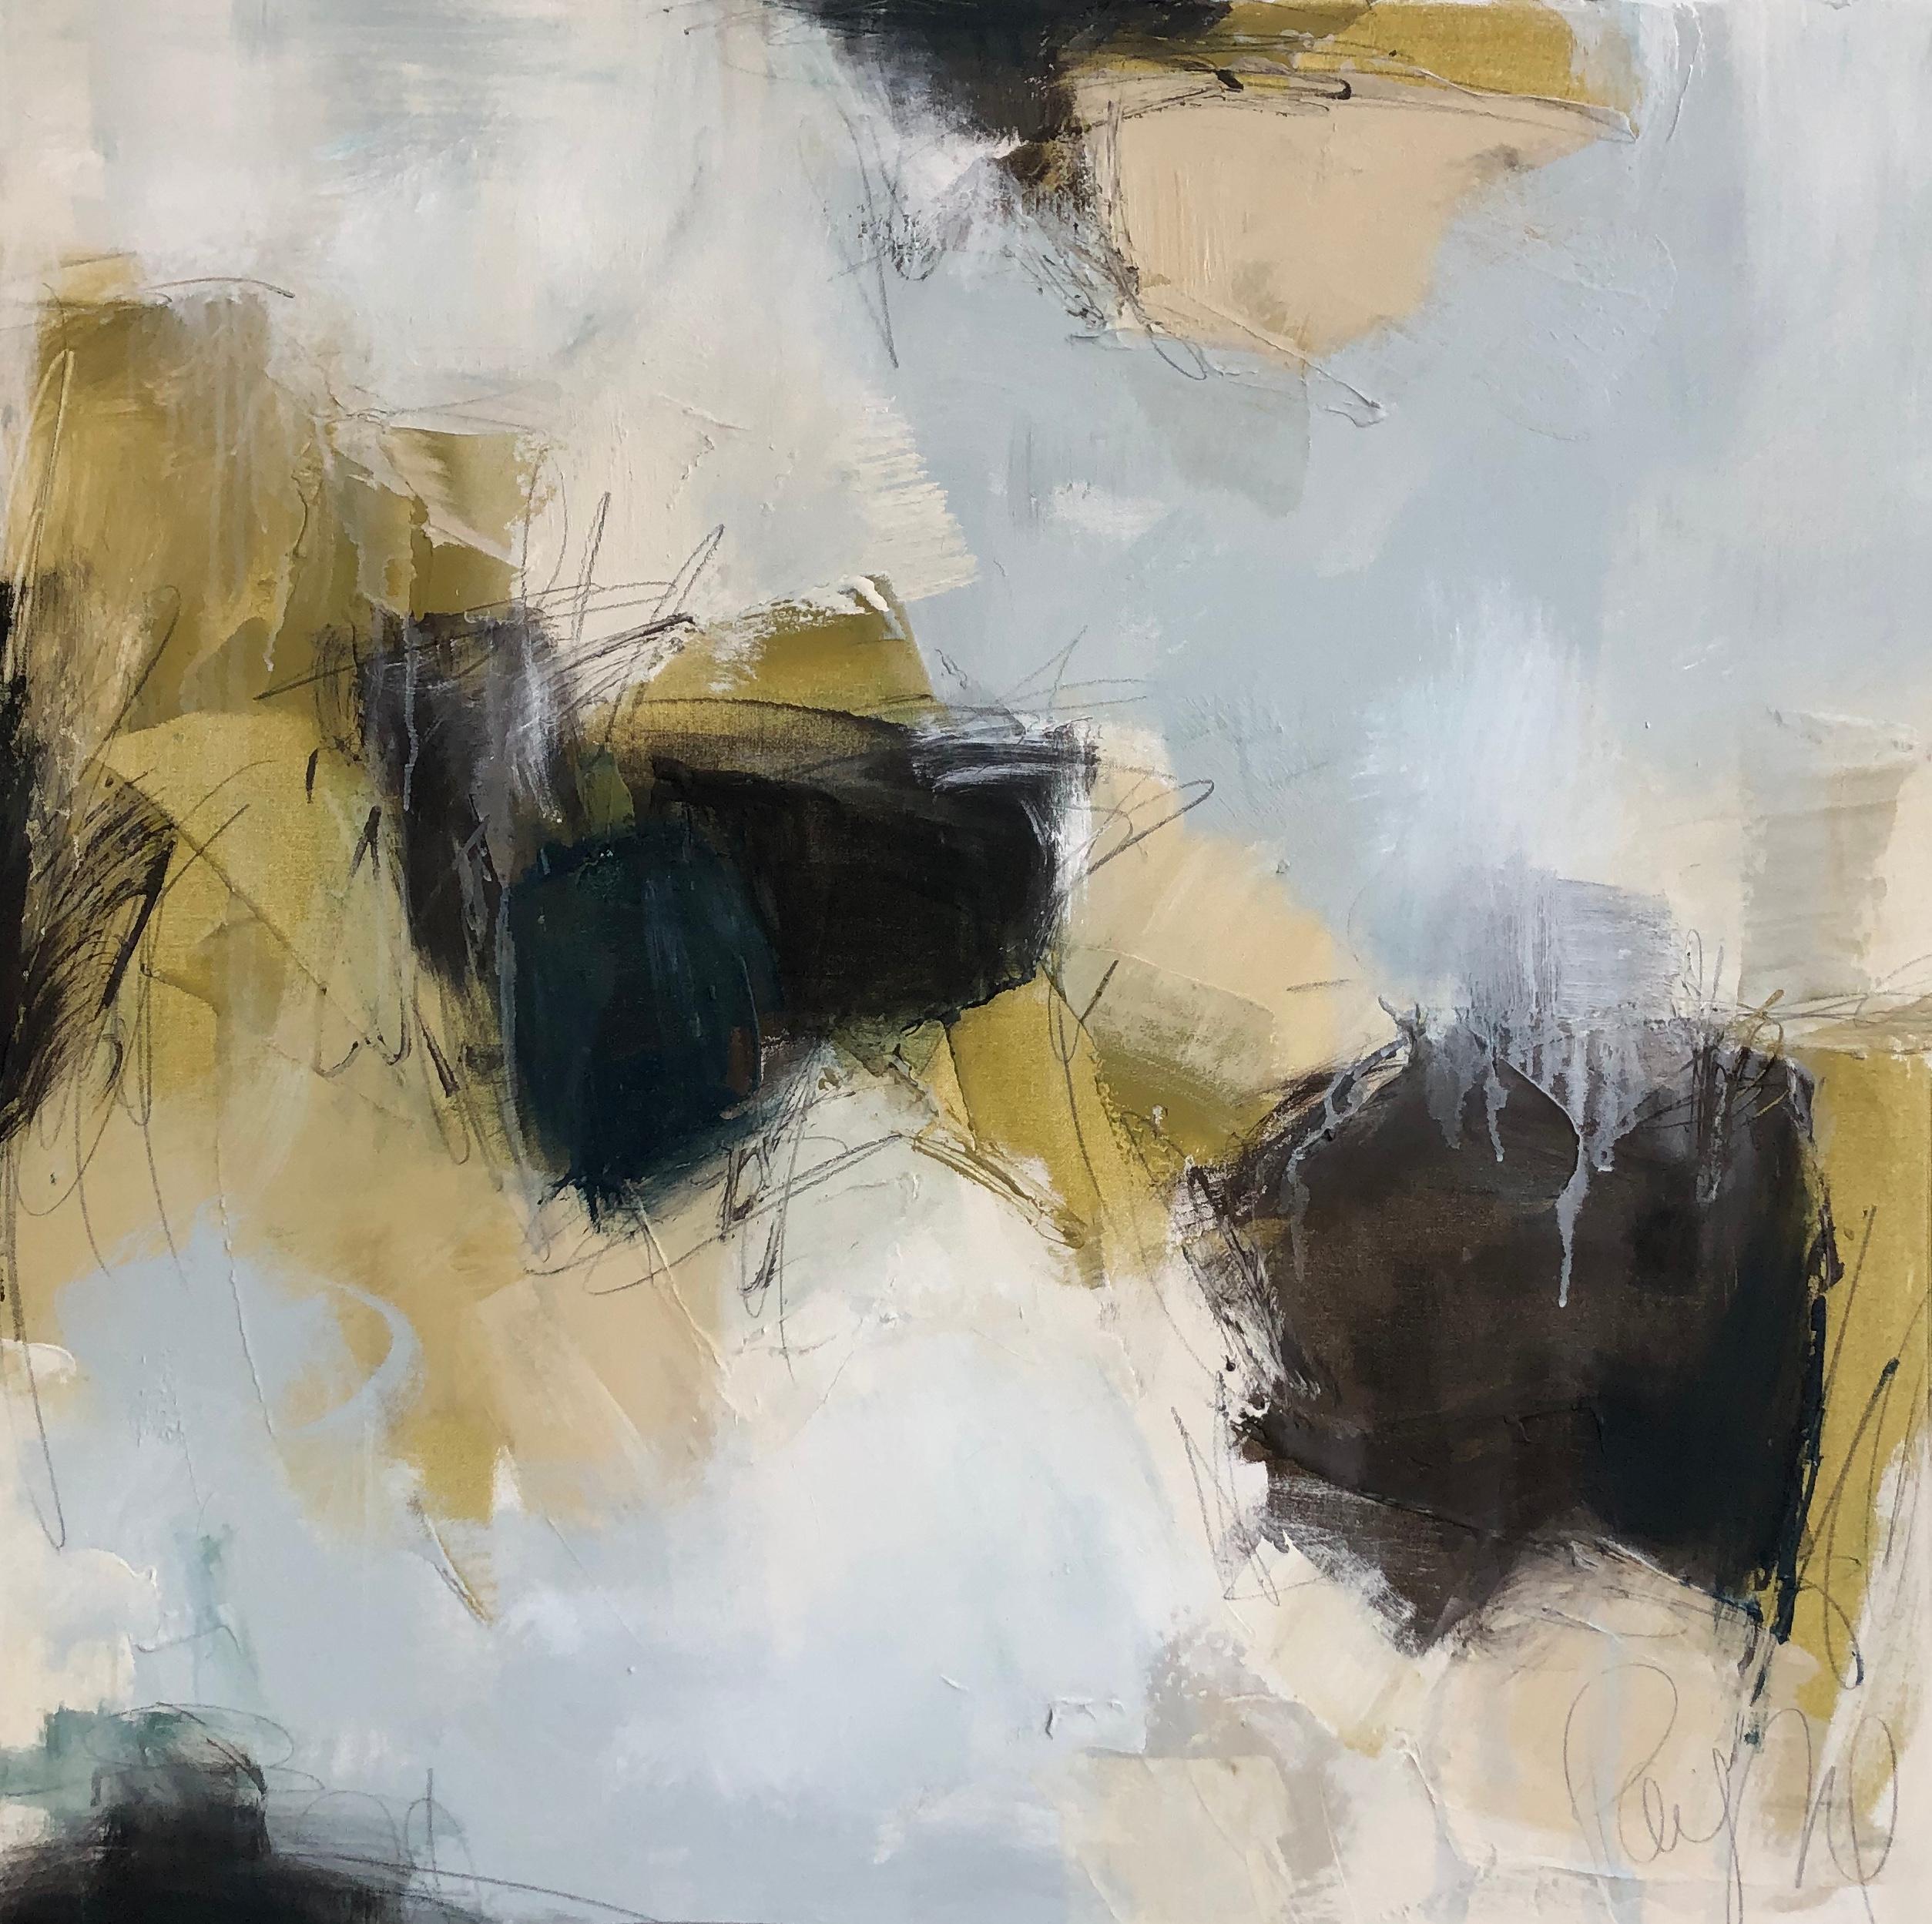 Connect is a medium size mixed media on canvas abstract painting of square format, created by American artist Melissa Payne Baker in 2020. Featuring a soft palette mostly made of green, blue and grey playing beautifully with the white negative